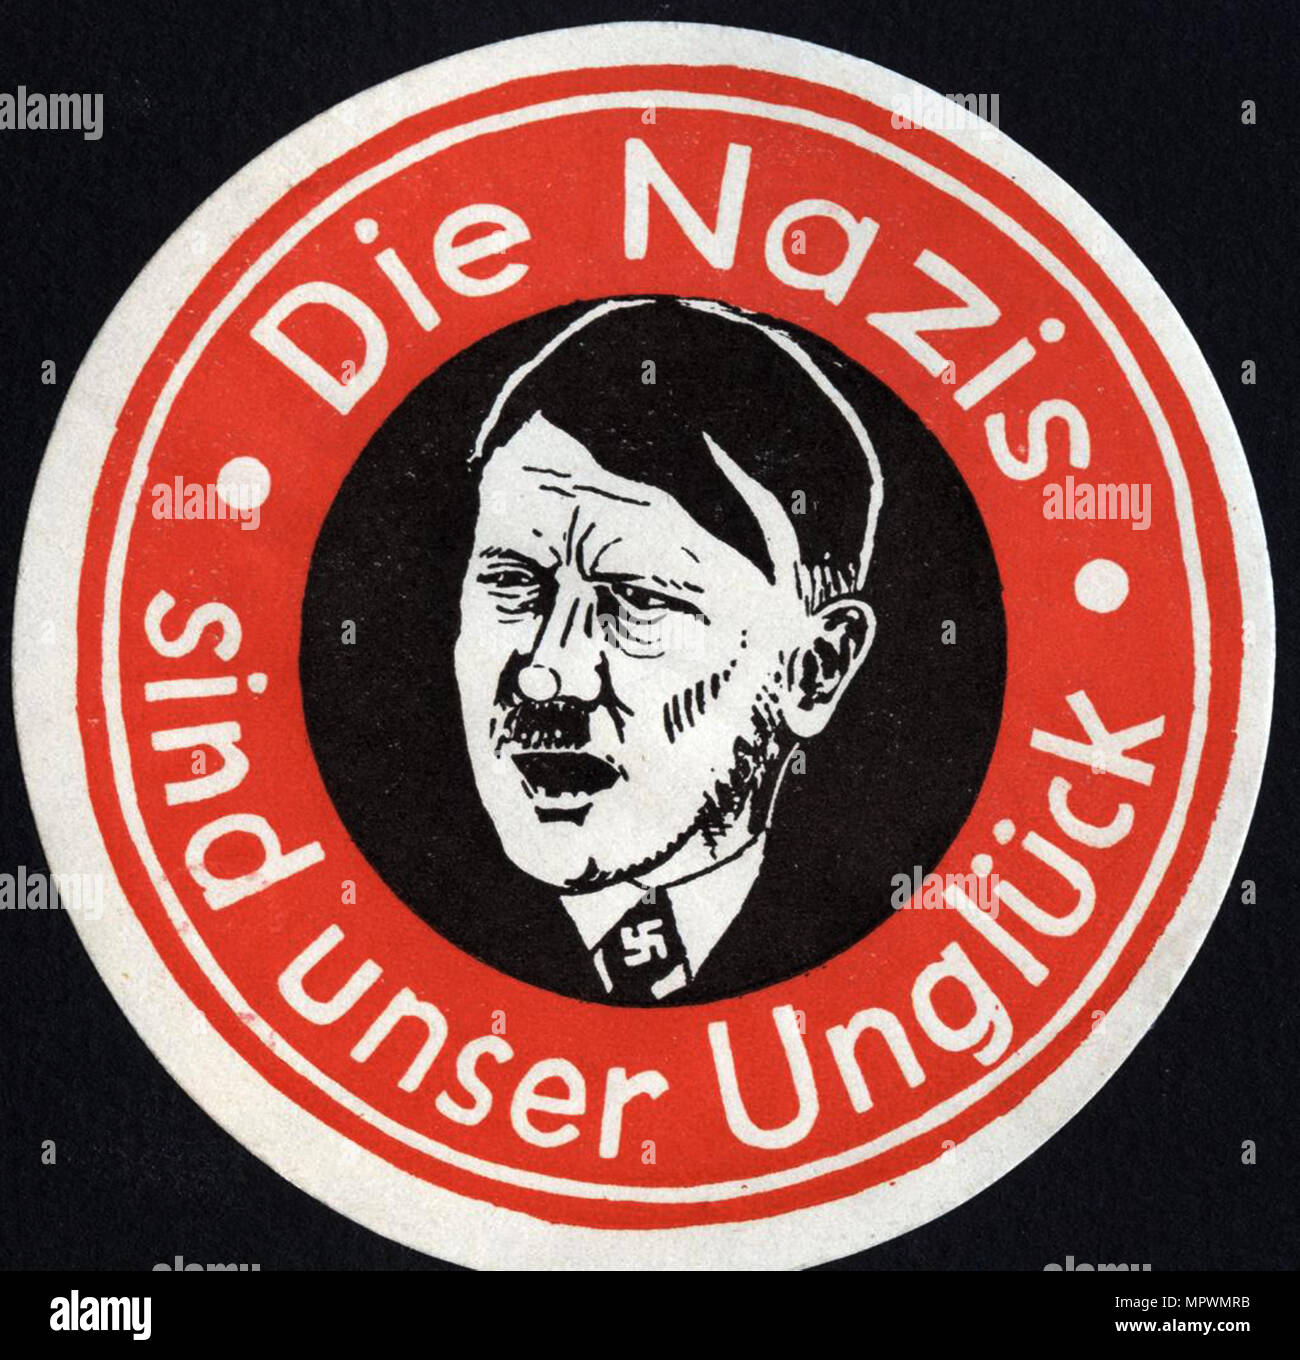 The Nazis are Our Misfortune, Early 1930s. Stock Photo